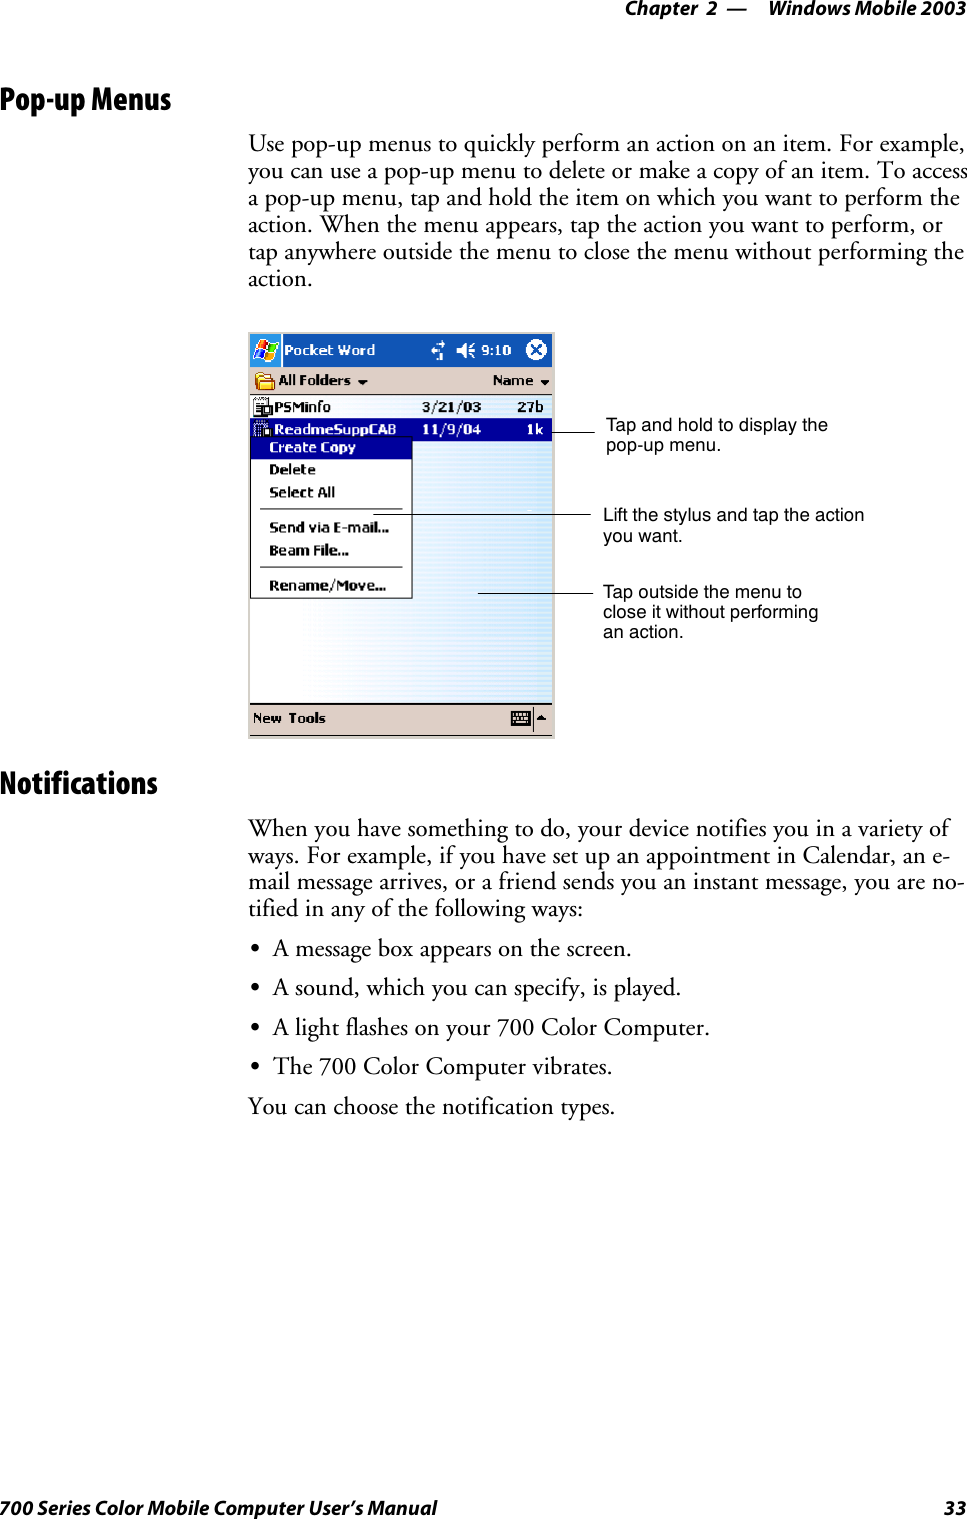 Windows Mobile 2003—Chapter 233700 Series Color Mobile Computer User’s ManualPop-up MenusUse pop-up menus to quickly perform an action on an item. For example,you can use a pop-up menu to delete or make a copy of an item. To accessa pop-up menu, tap and hold the item on which you want to perform theaction. When the menu appears, tap the action you want to perform, ortap anywhere outside the menu to close the menu without performing theaction.Tap and hold to display thepop-up menu.Lift the stylus and tap the actionyou want.Tap outside the menu toclose it without performingan action.NotificationsWhen you have something to do, your device notifies you in a variety ofways. For example, if you have set up an appointment in Calendar, an e-mail message arrives, or a friend sends you an instant message, you are no-tified in any of the following ways:SA message box appears on the screen.SA sound, which you can specify, is played.SA light flashes on your 700 Color Computer.SThe700ColorComputervibrates.You can choose the notification types.